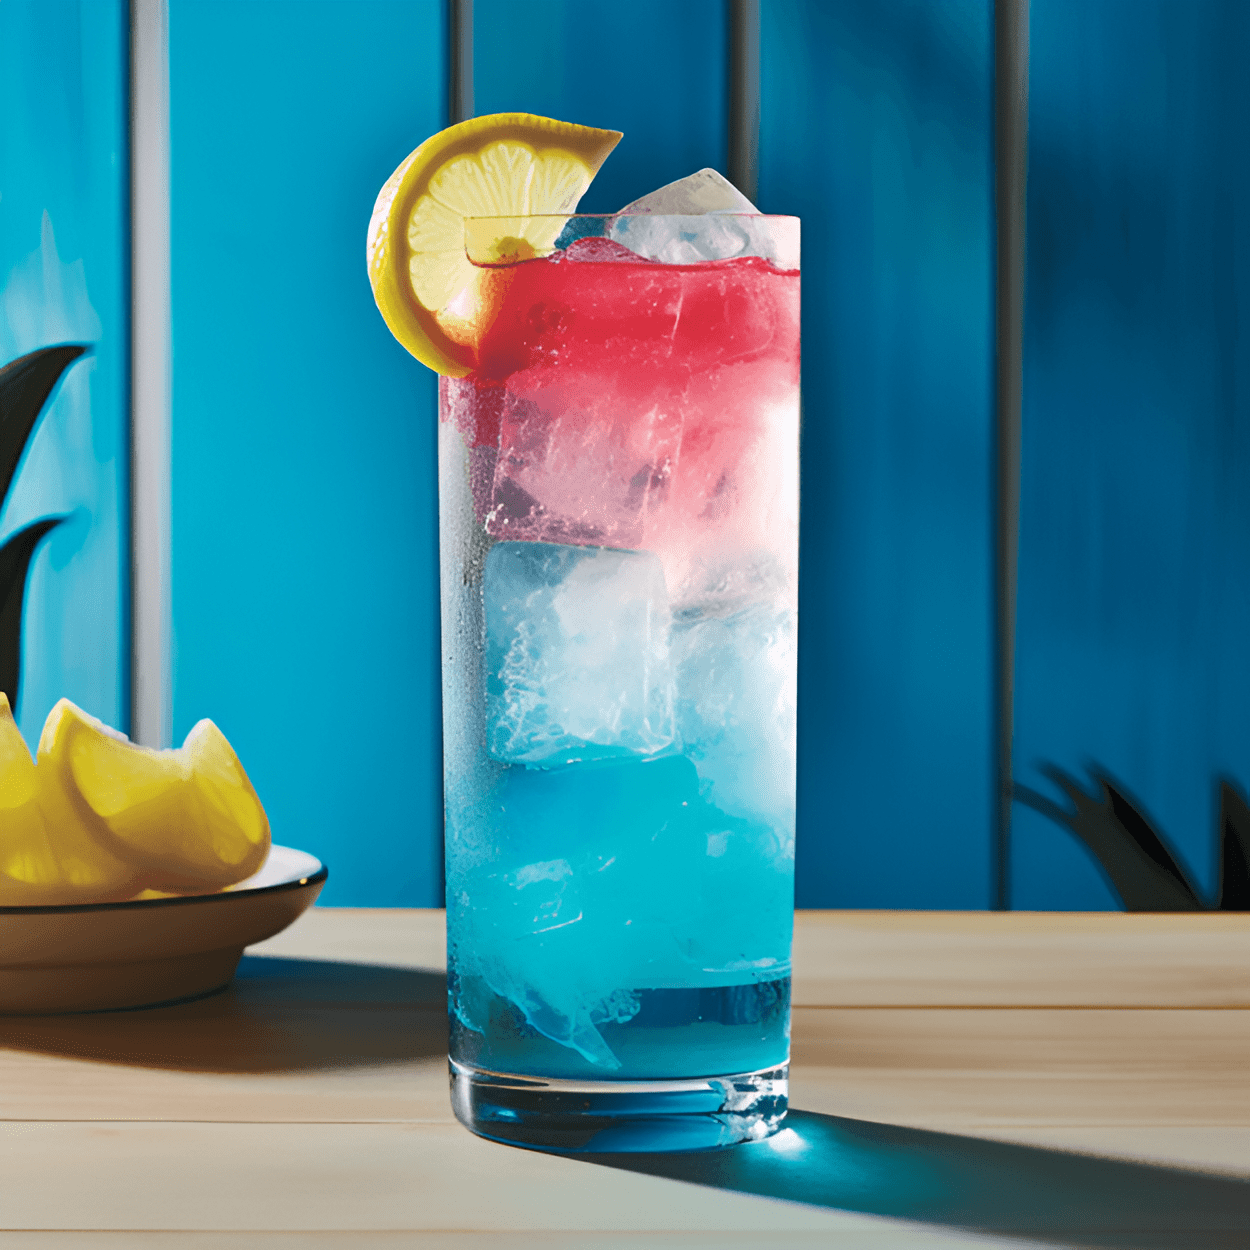 La Water Cocktail Recipe - La Water is a potent, fruity cocktail with a sweet and slightly sour taste. The combination of different spirits gives it a complex, layered flavor, while the sweet and sour mix and blue curacao lend a refreshing citrusy note.